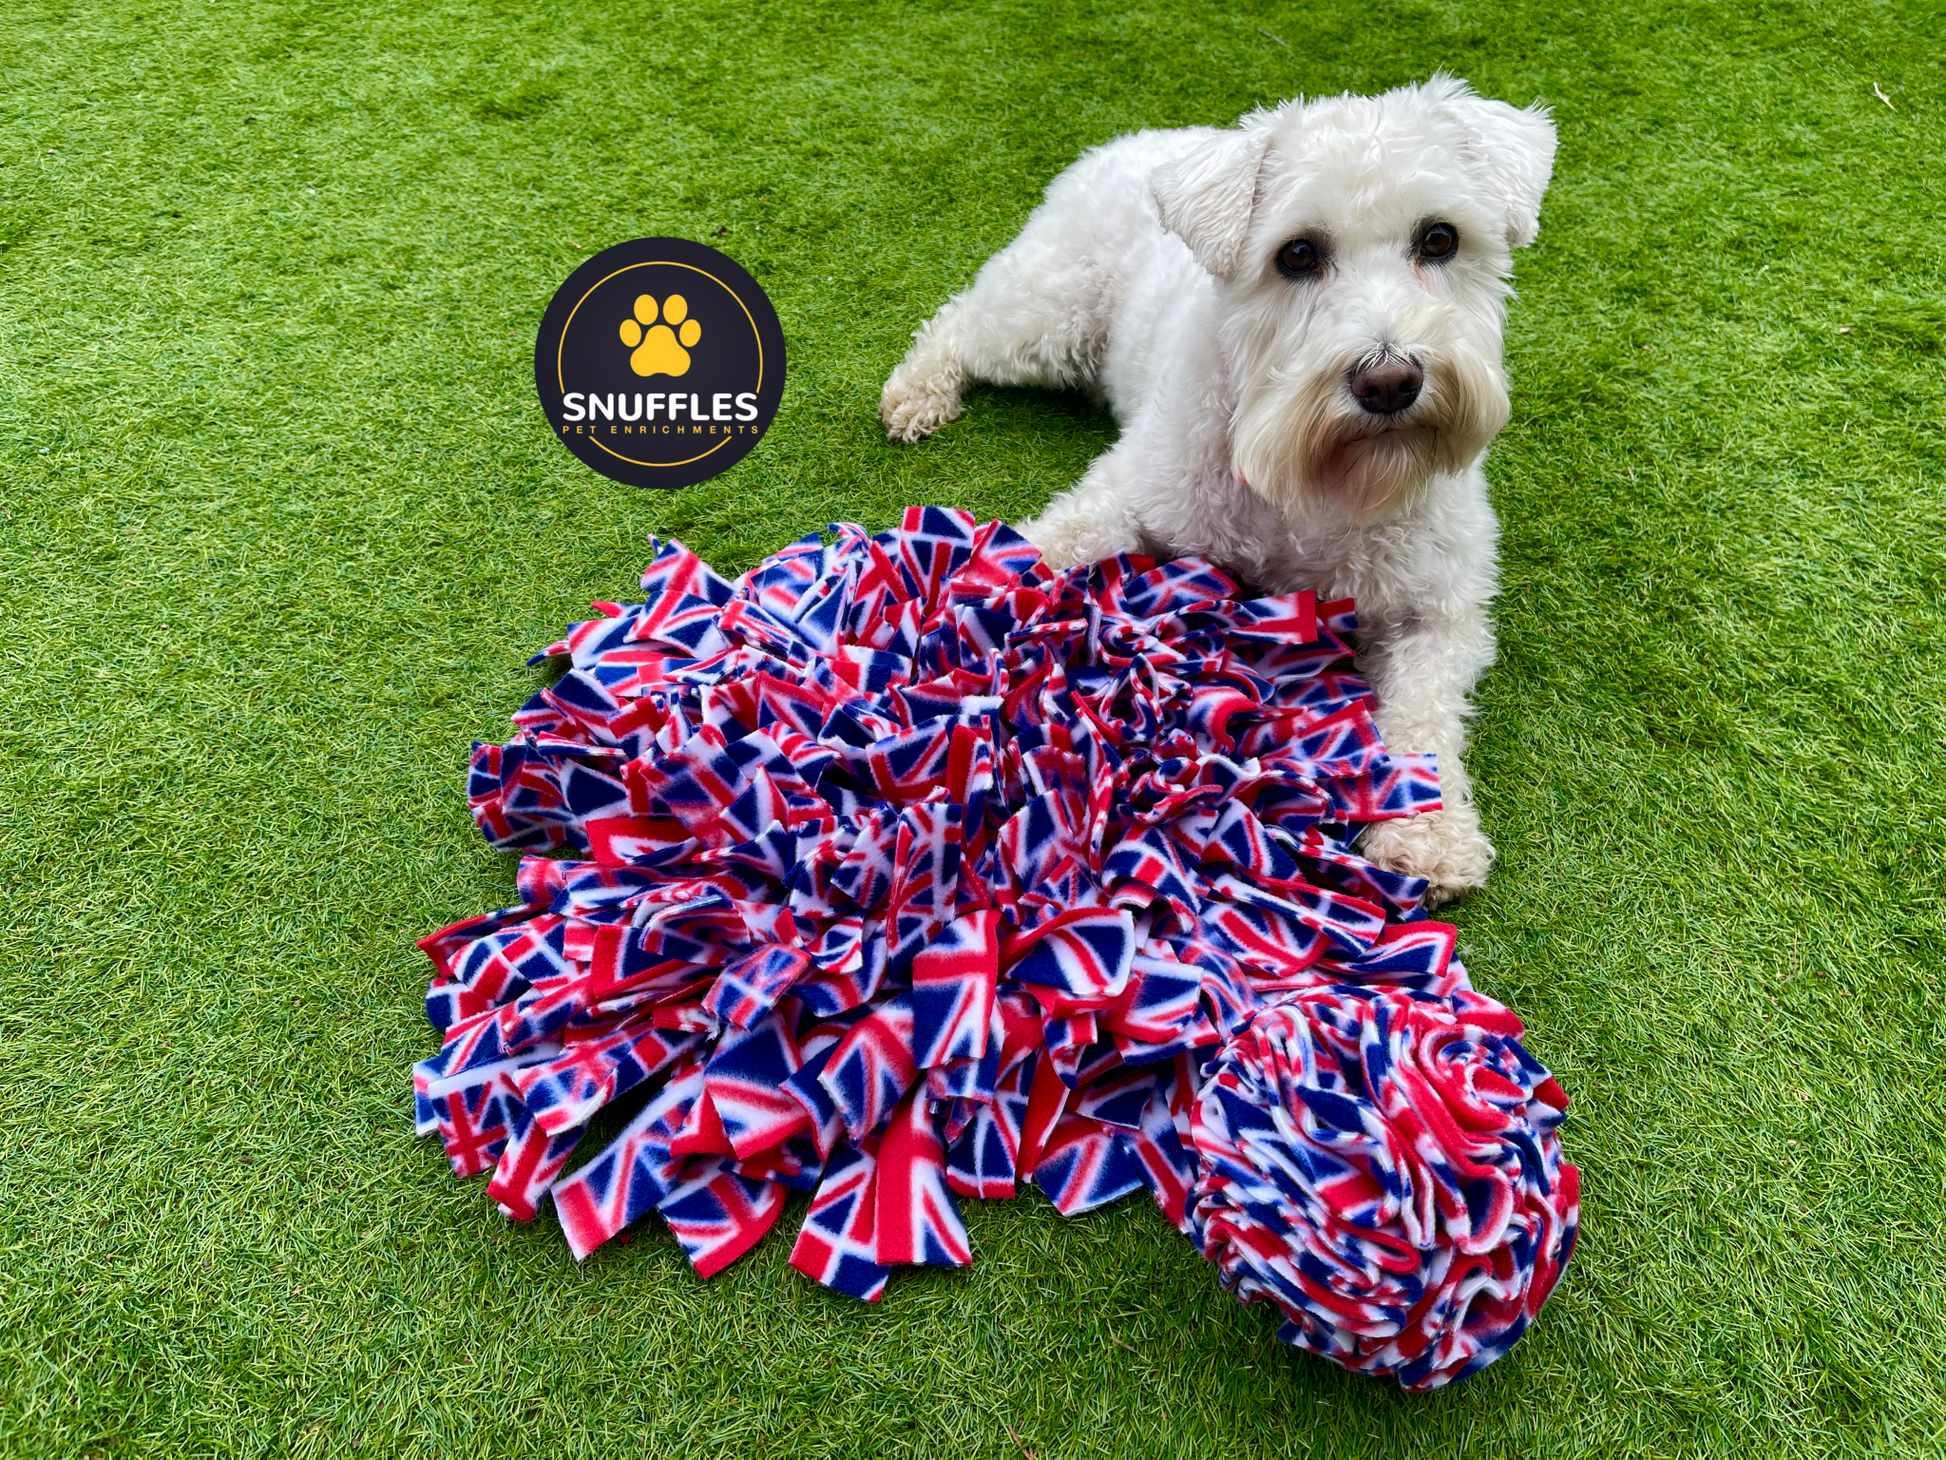 Medium Snuffle Mat And Medium Snuffle Ball Set For Dogs, Available In 10 Colour Option